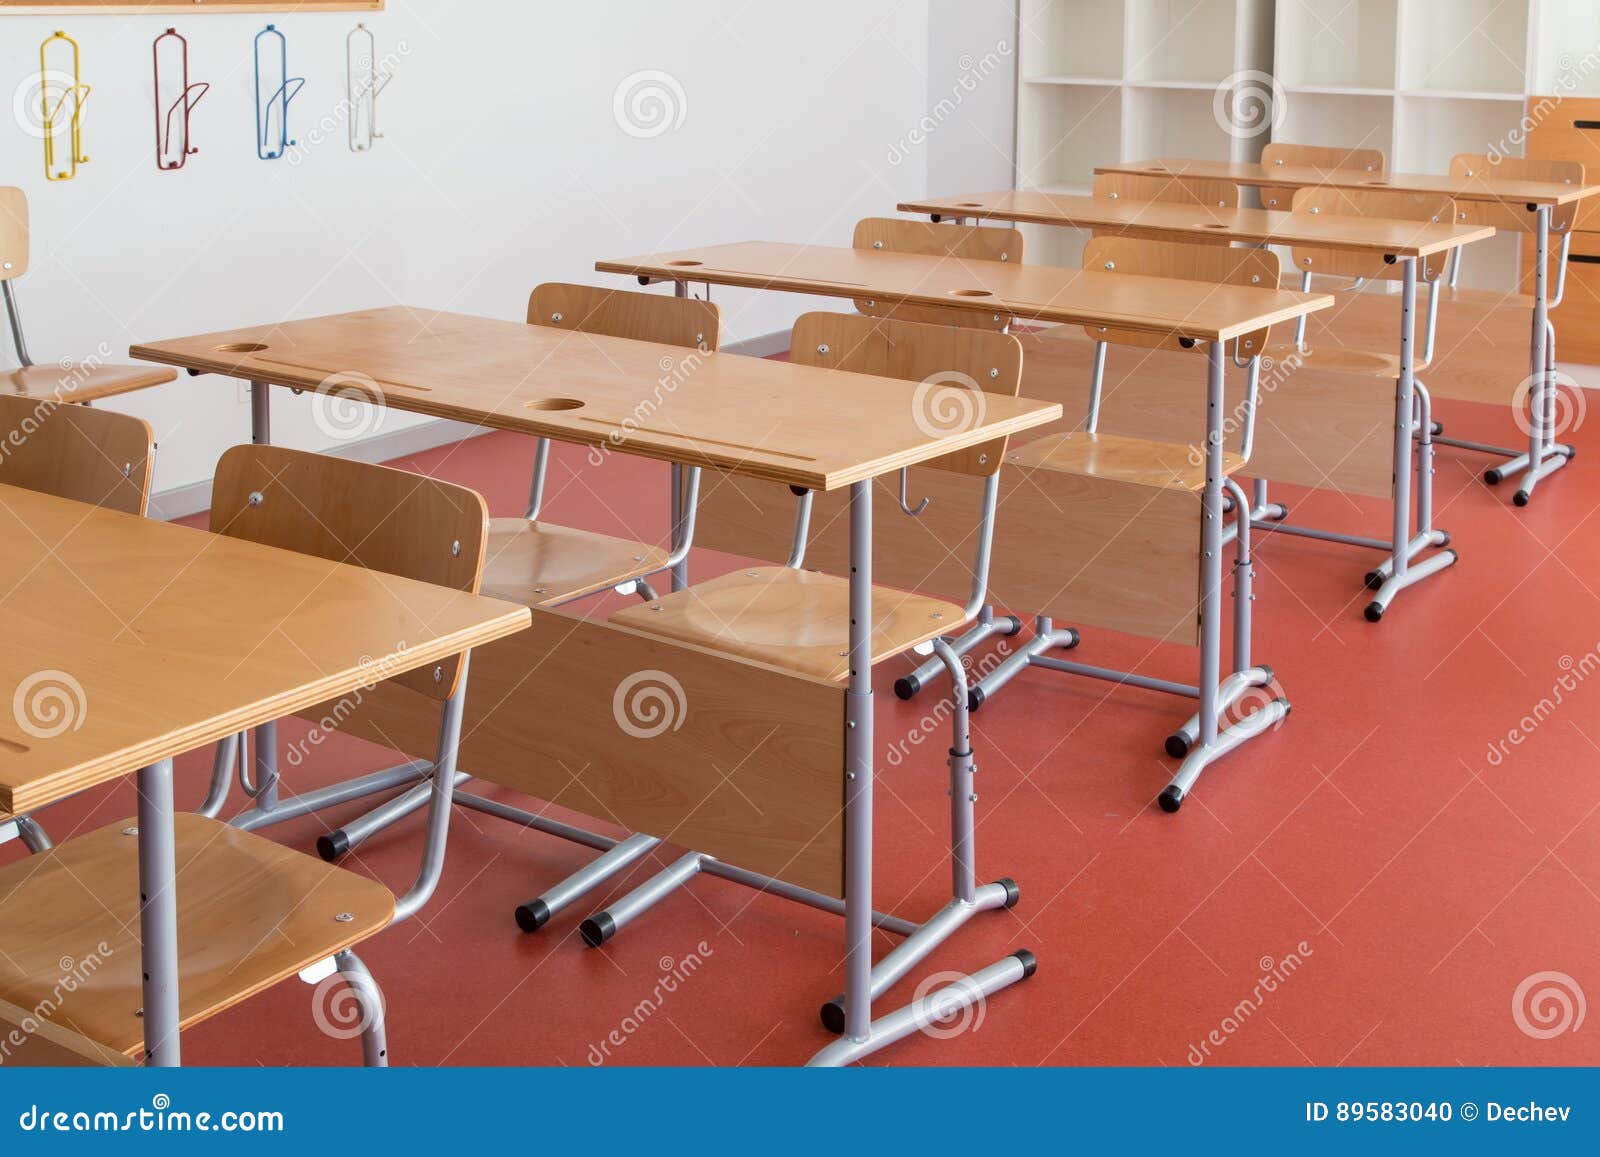 Classroom With Wooden Desks And Chairs Stock Photo Image Of Room